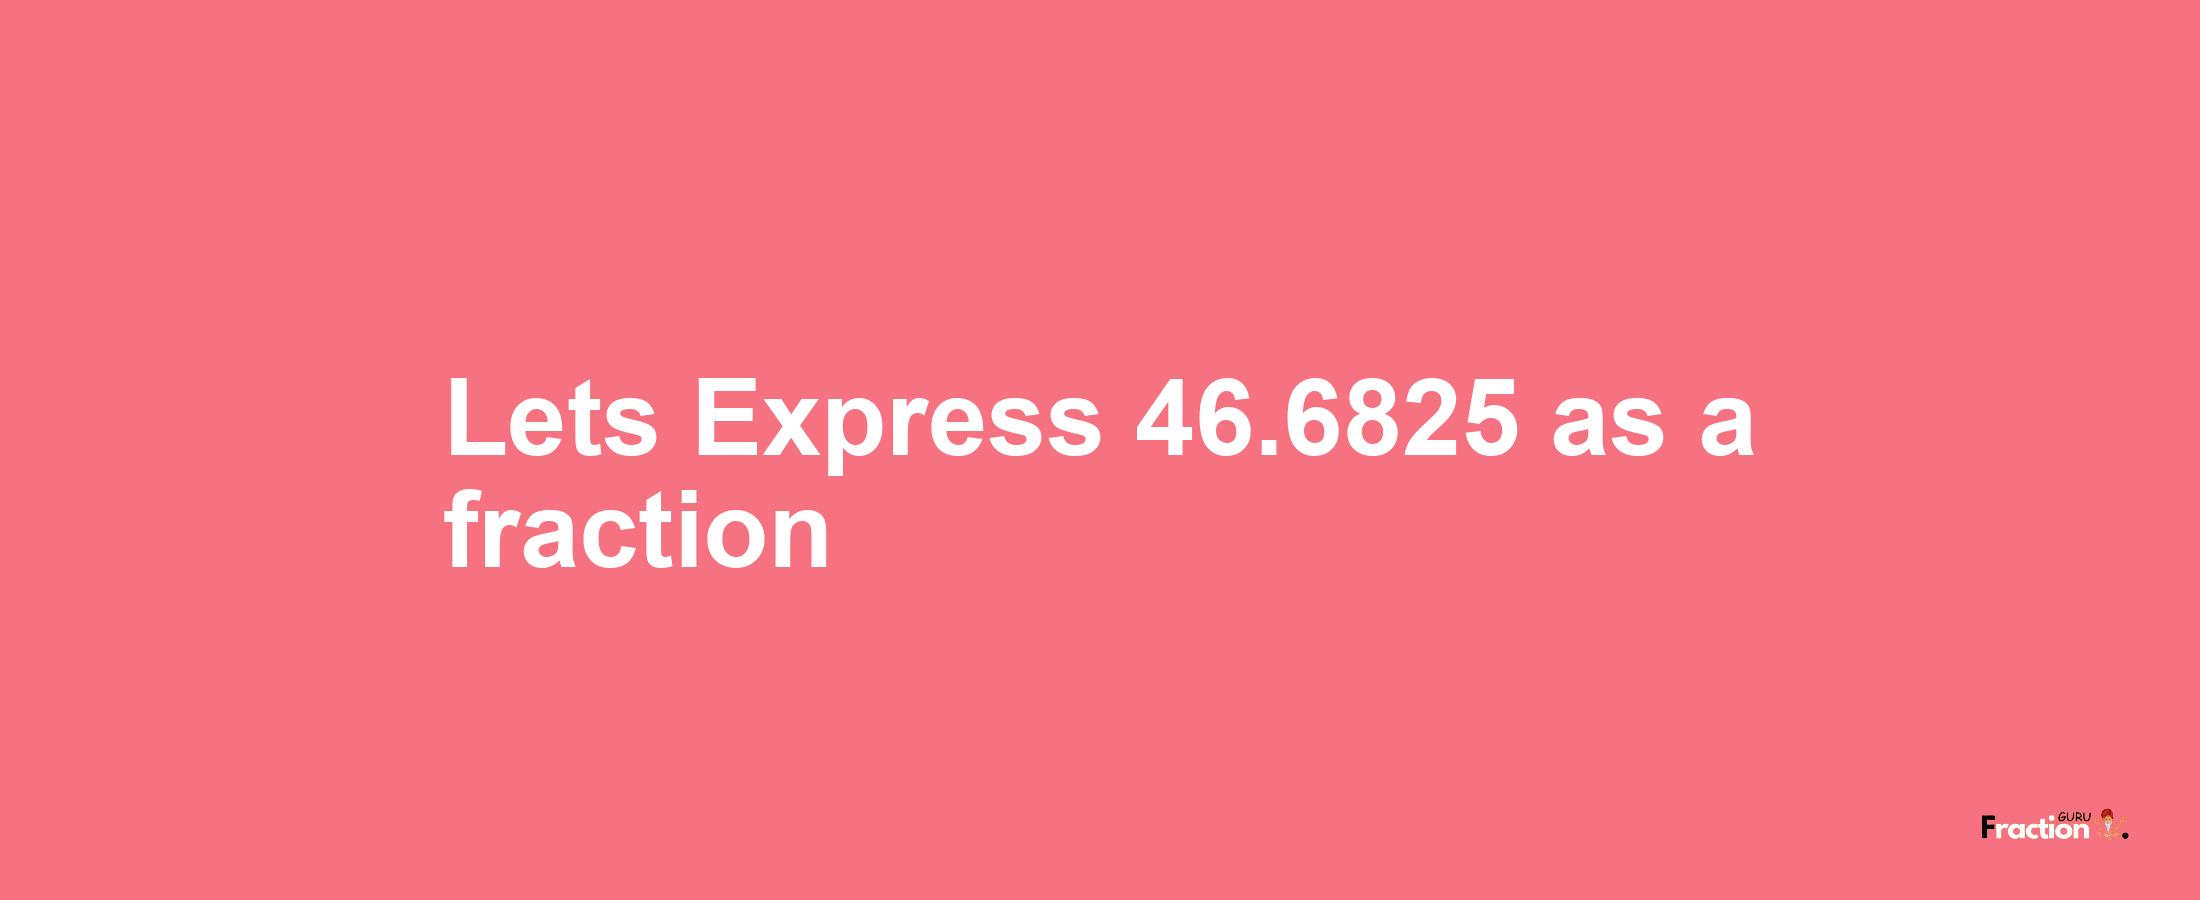 Lets Express 46.6825 as afraction